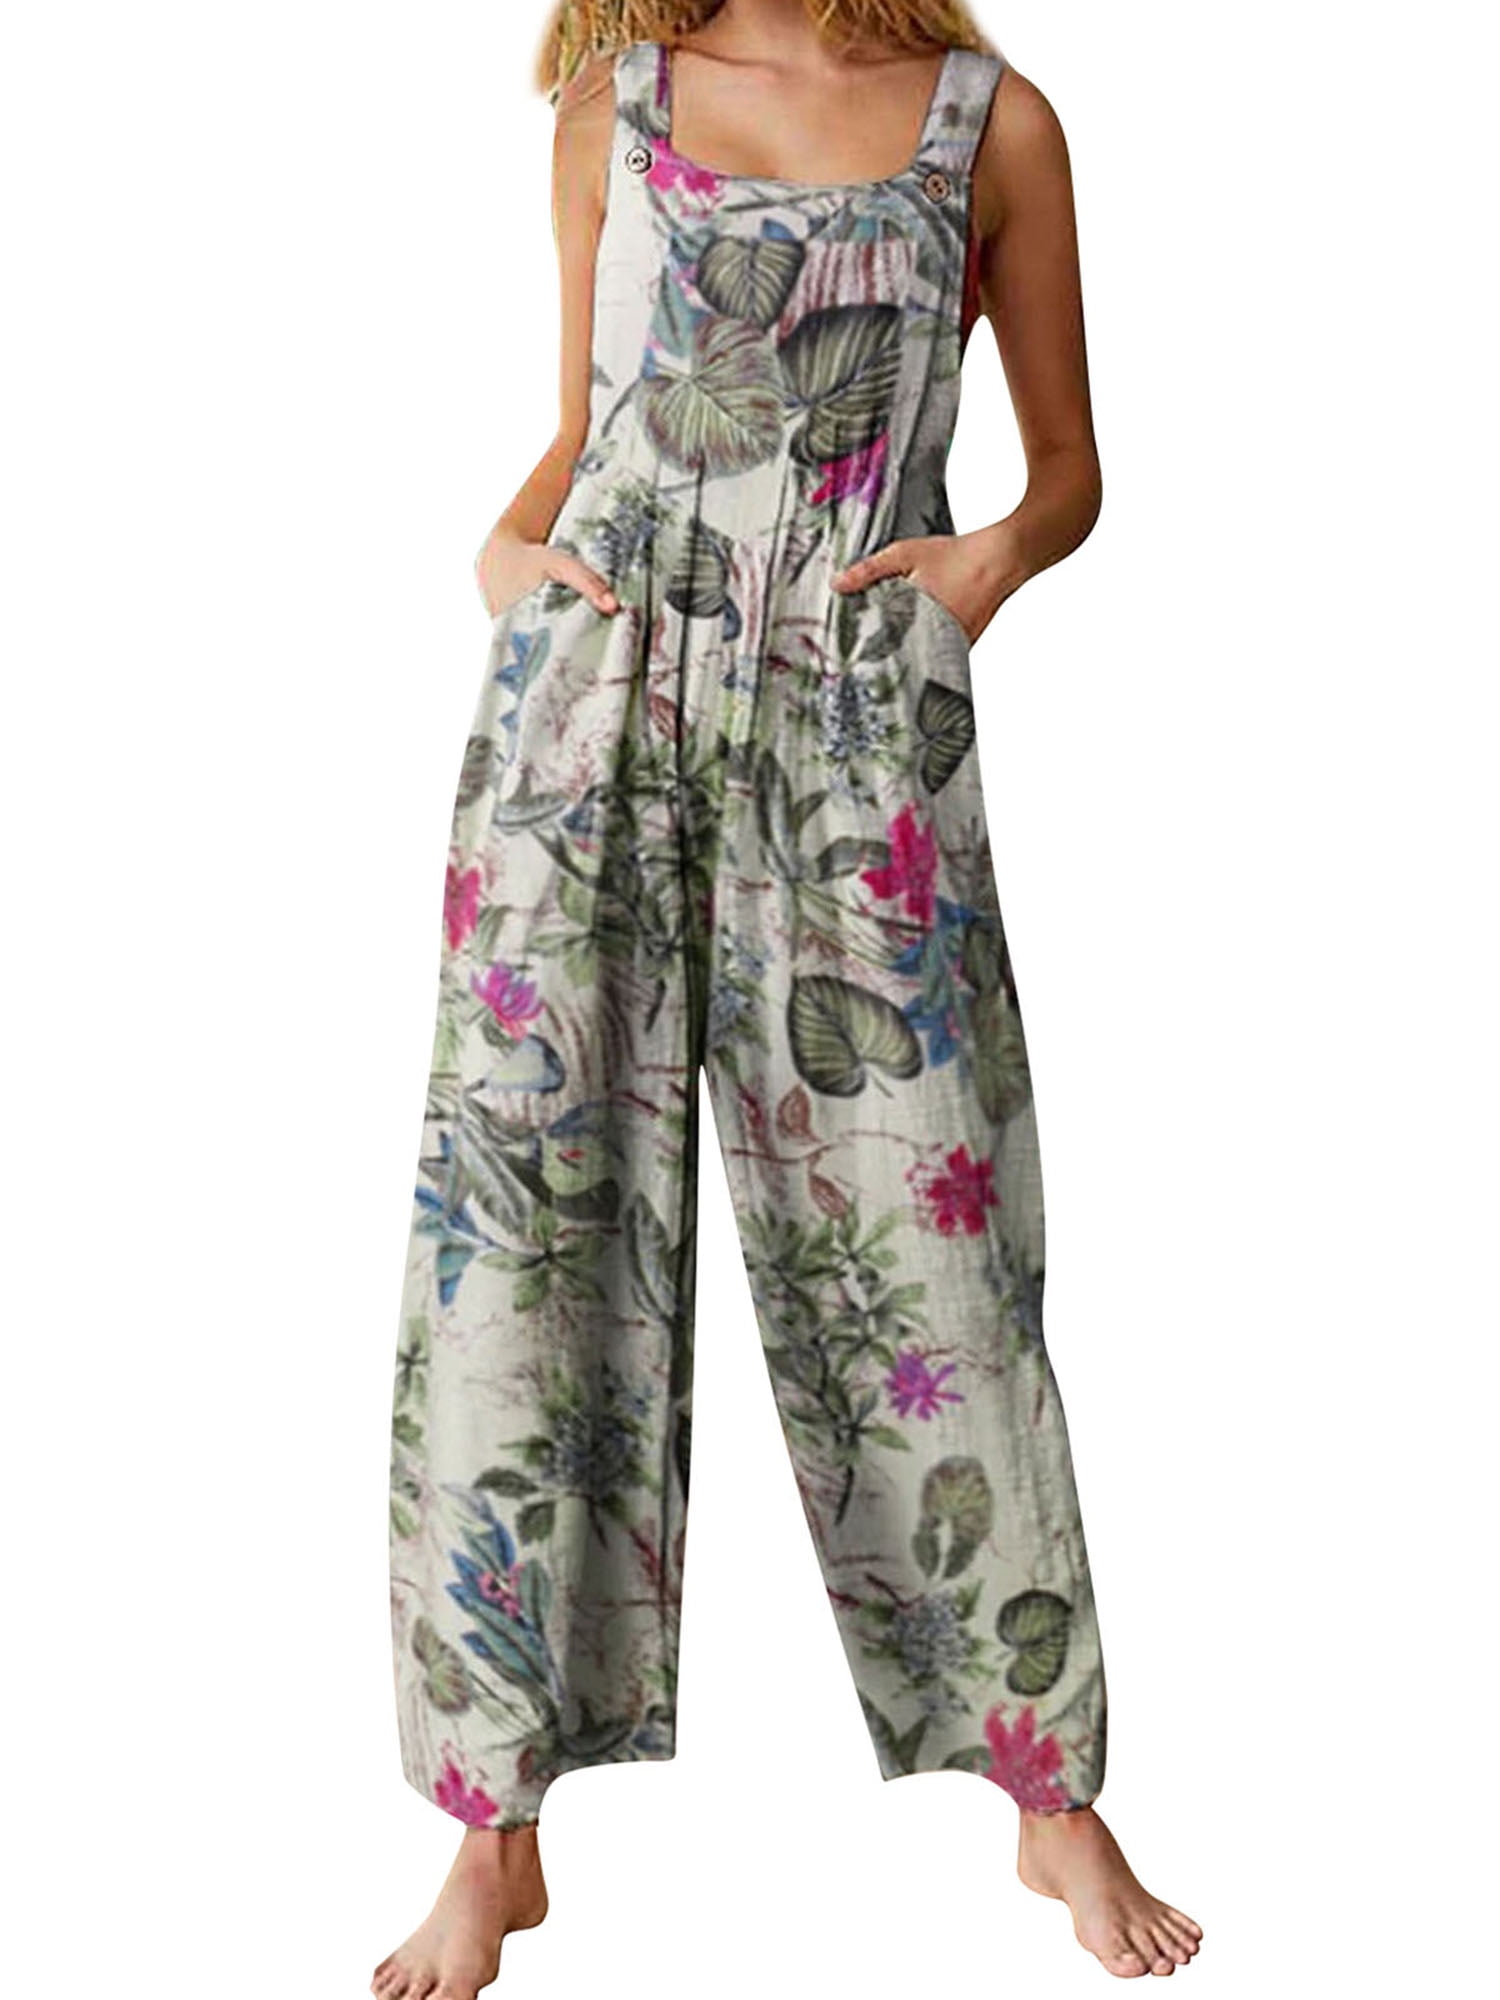 Ehfomius S-2XL Floral Print Jumpsuit for Women Summer Sleeveless Loose ...